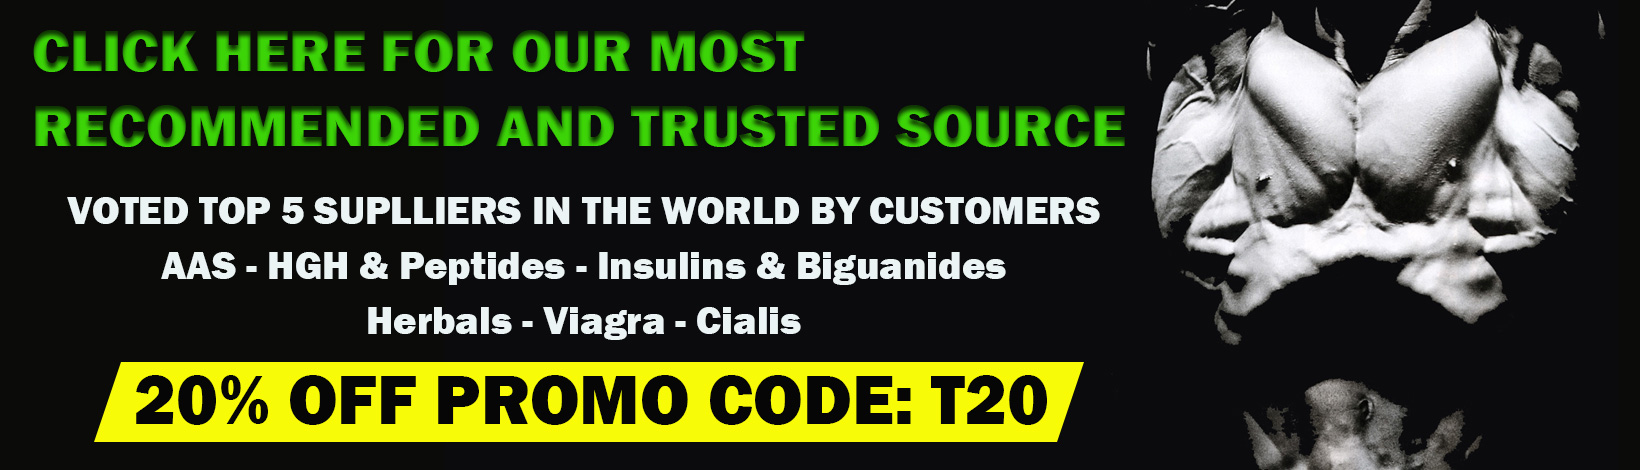 TRUSTED-SOURCE-LINK-INSERT-